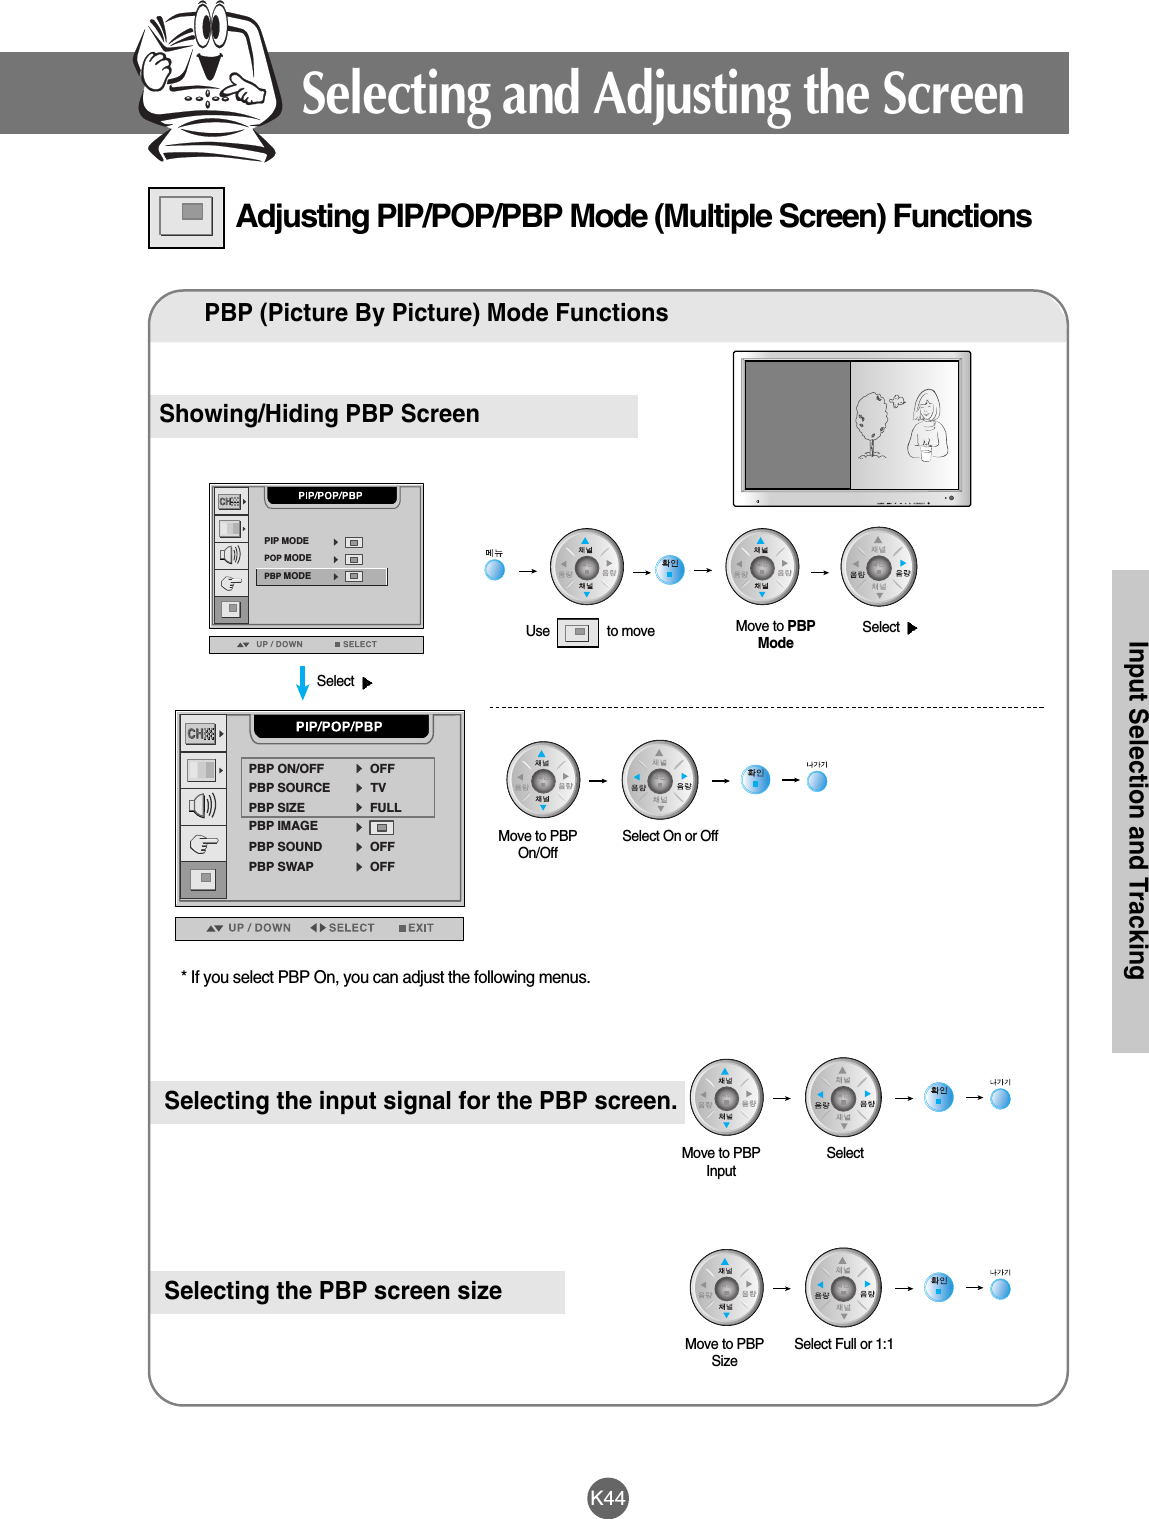 K44Input Selection and TrackingAdjusting PIP/POP/PBP Mode (Multiple Screen) FunctionsPBP (Picture By Picture) Mode FunctionsShowing/Hiding PBP ScreenSelecting the input signal for the PBP screen.Move to PBPModeSelect Move to PBPOn/OffSelect On or OffMove to PBPInputSelect Selecting the PBP screen sizeMove to PBPSize Select Full or 1:1PIP MODEPOP MODEPBP MODETVPBP ON/OFF OFFPBP SOURCEPBP SIZE FULLPBP IMAGEPBP SOUNDPBP SWAPOFFOFF* If you select PBP On, you can adjust the following menus.Select Selecting and Adjusting the ScreenUse                to move